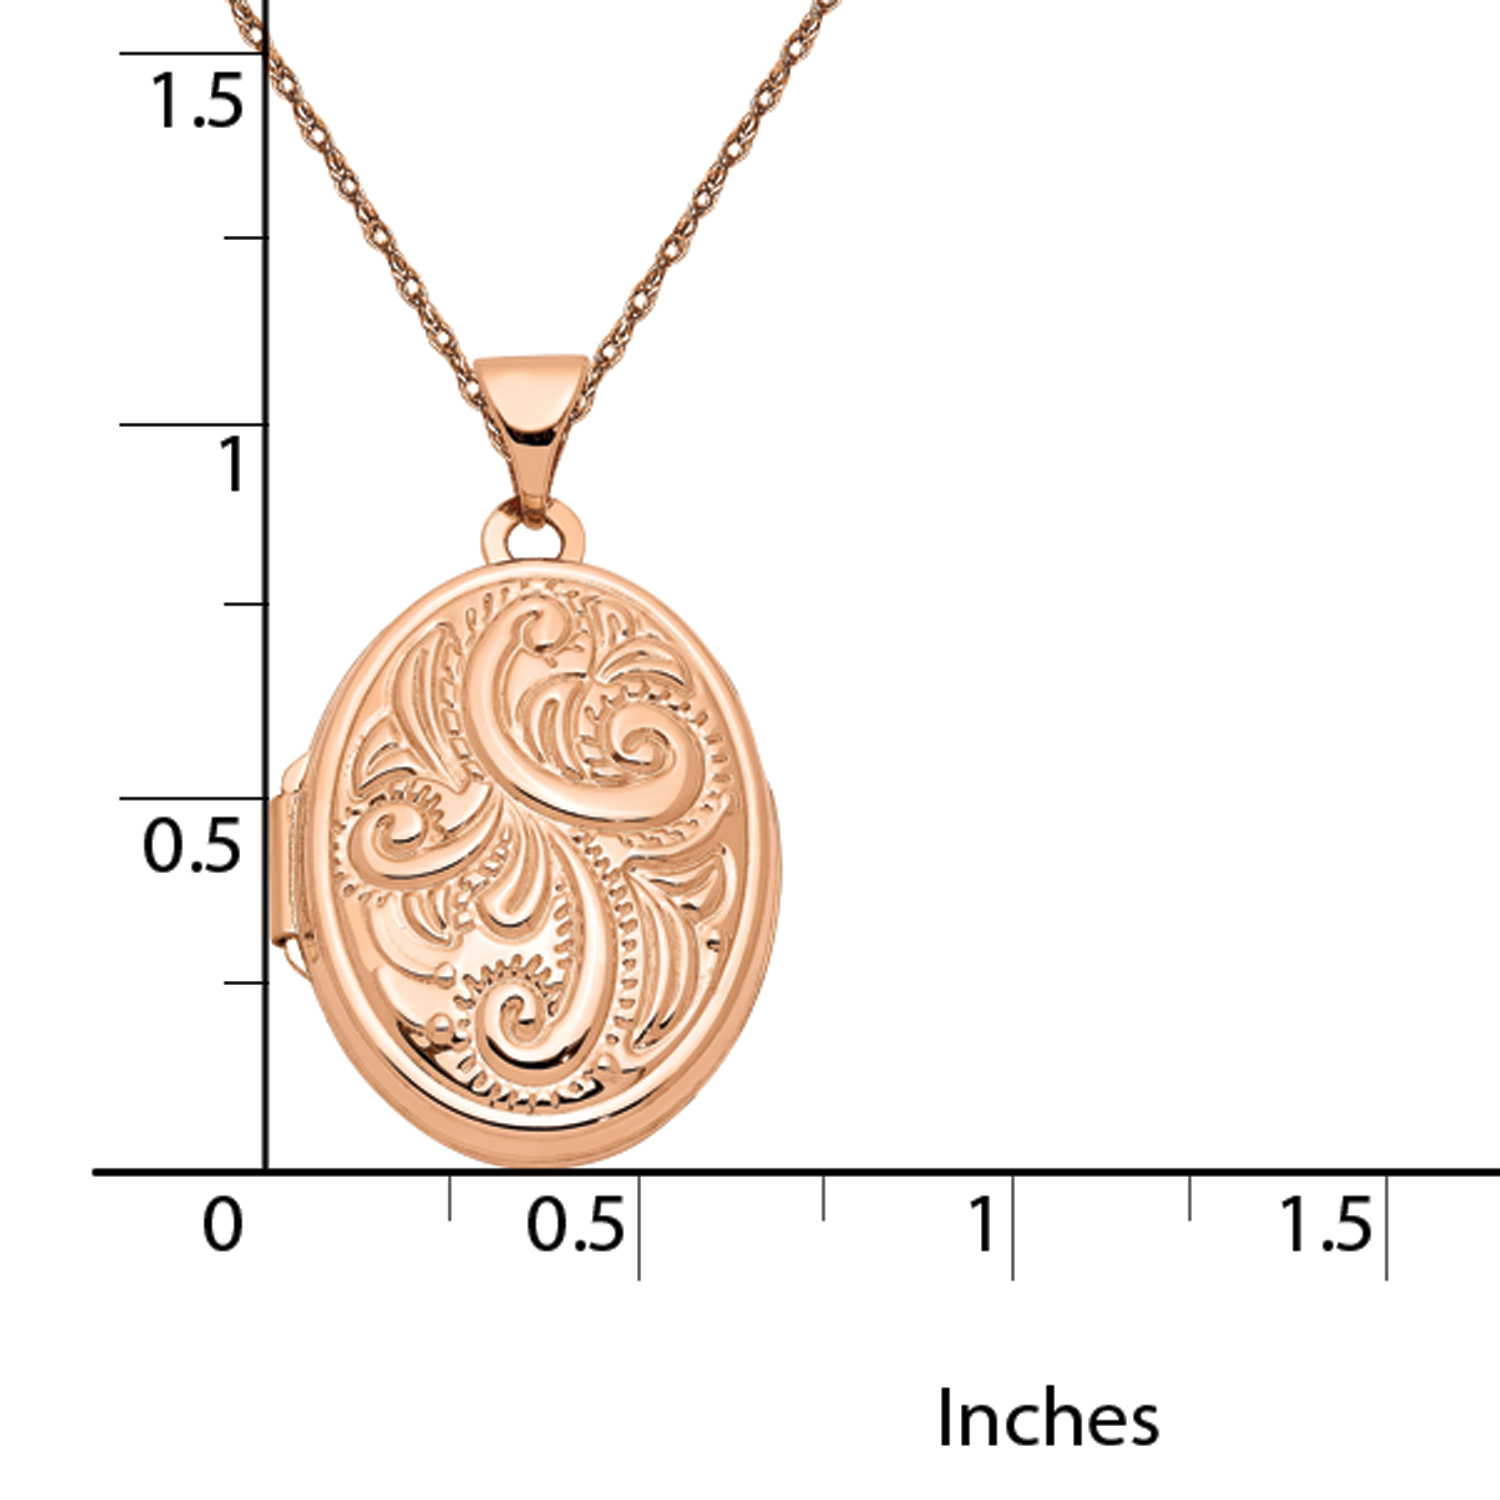 Primal Gold 14 Karat Rose Gold Domed Oval Locket with 18-inch Cable Rope Chain - image 2 of 4